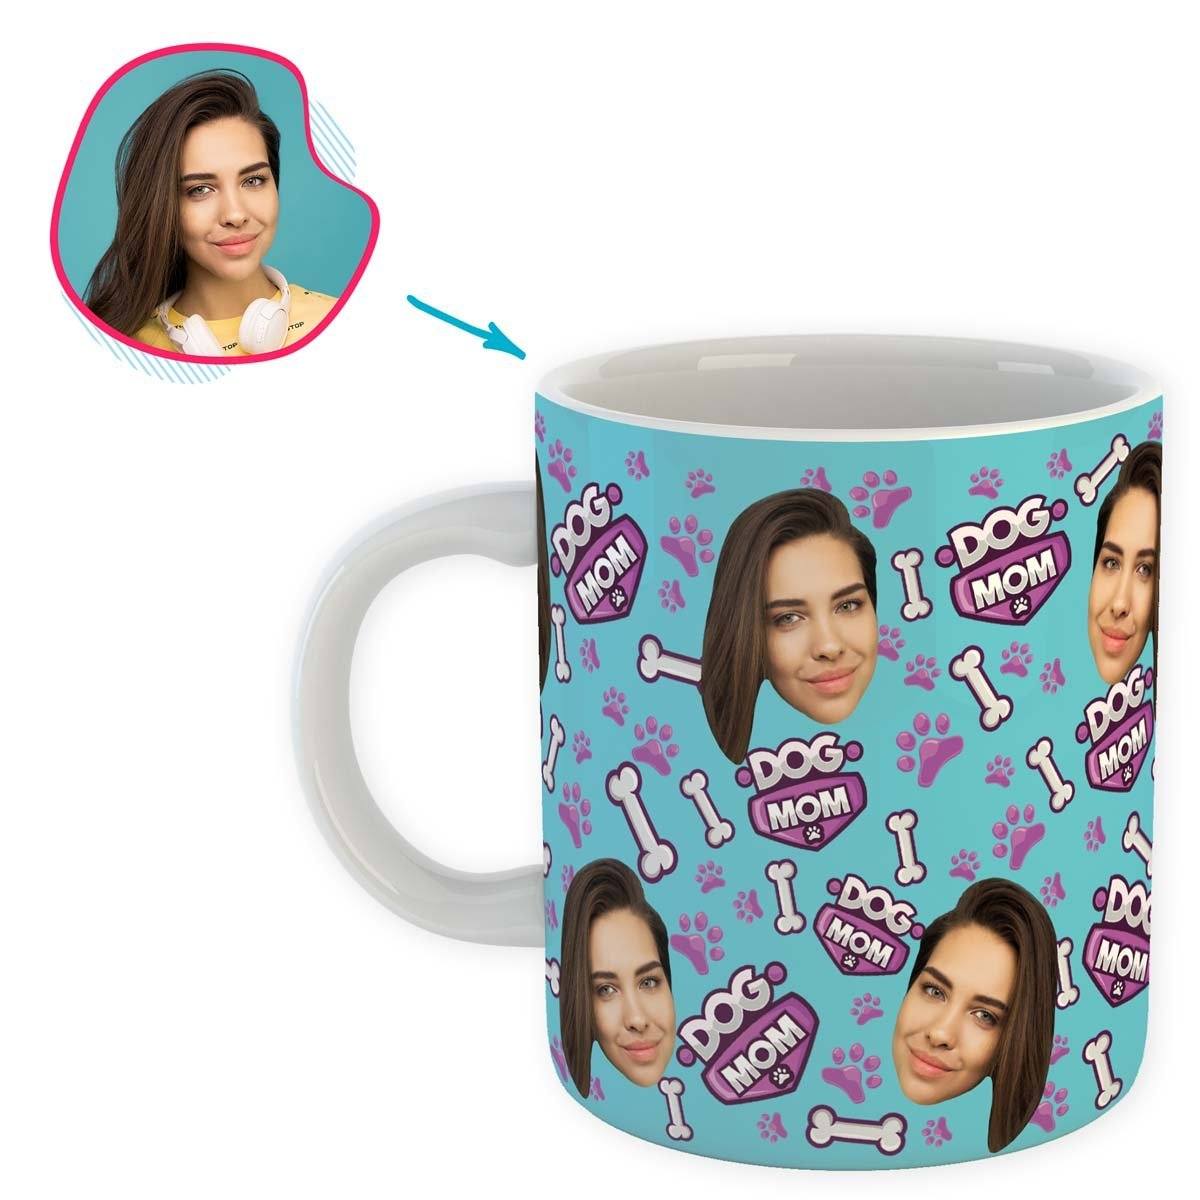 blue Dog Mom mug personalized with photo of face printed on it